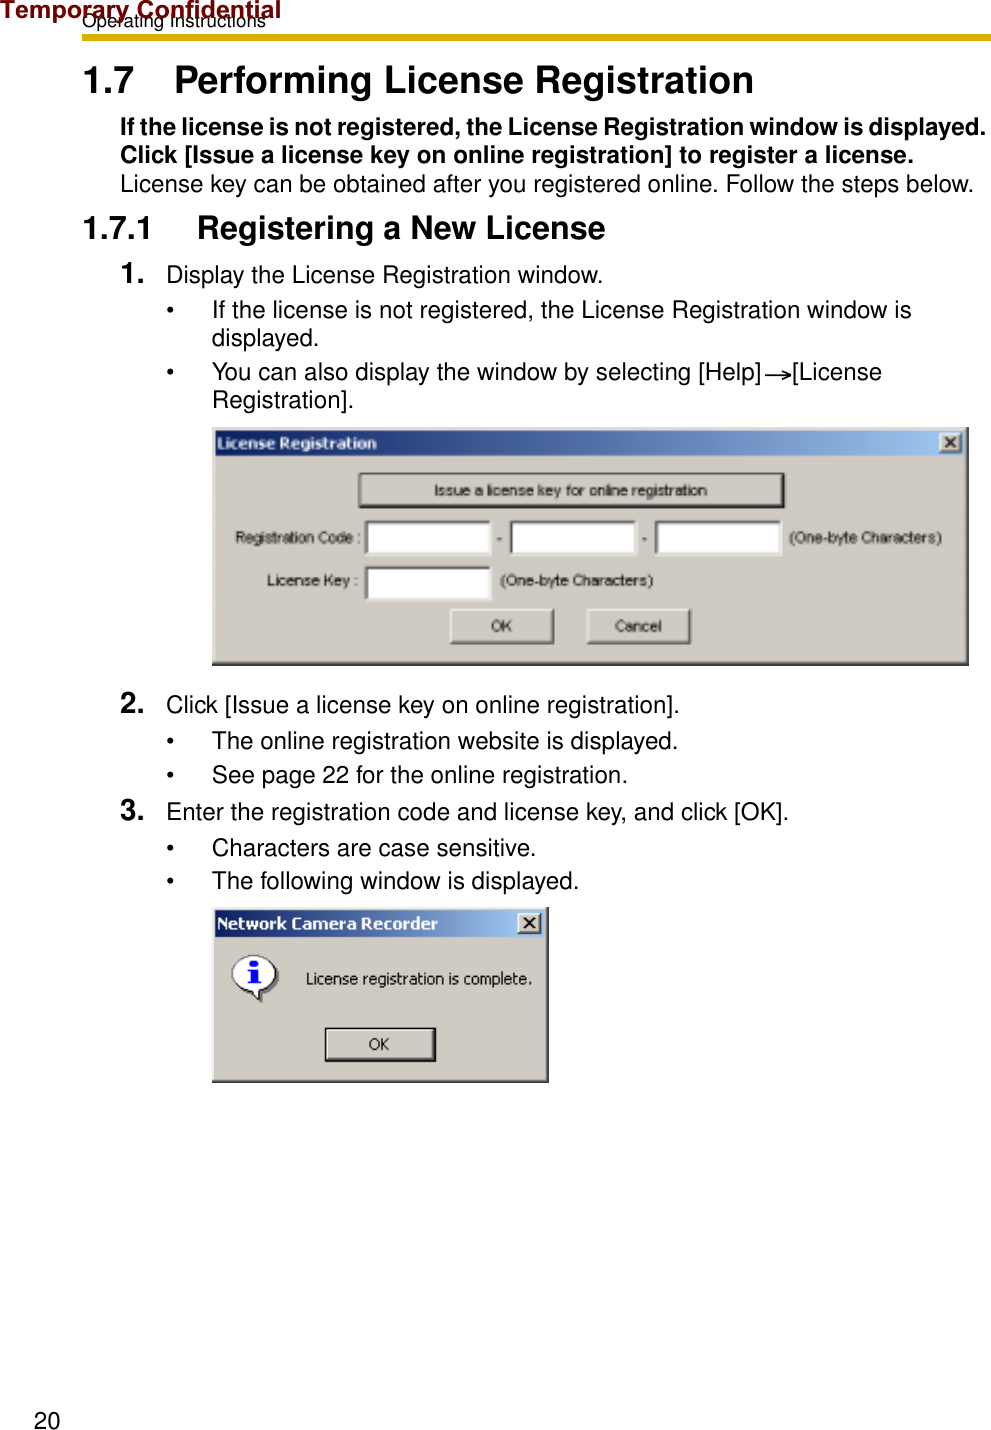 Operating Instructions201.7 Performing License RegistrationIf the license is not registered, the License Registration window is displayed. Click [Issue a license key on online registration] to register a license.License key can be obtained after you registered online. Follow the steps below.1.7.1 Registering a New License1. Display the License Registration window.• If the license is not registered, the License Registration window is displayed.• You can also display the window by selecting [Help] [License Registration].2. Click [Issue a license key on online registration].• The online registration website is displayed.• See page 22 for the online registration.3. Enter the registration code and license key, and click [OK].• Characters are case sensitive.• The following window is displayed.Temporary Confidential